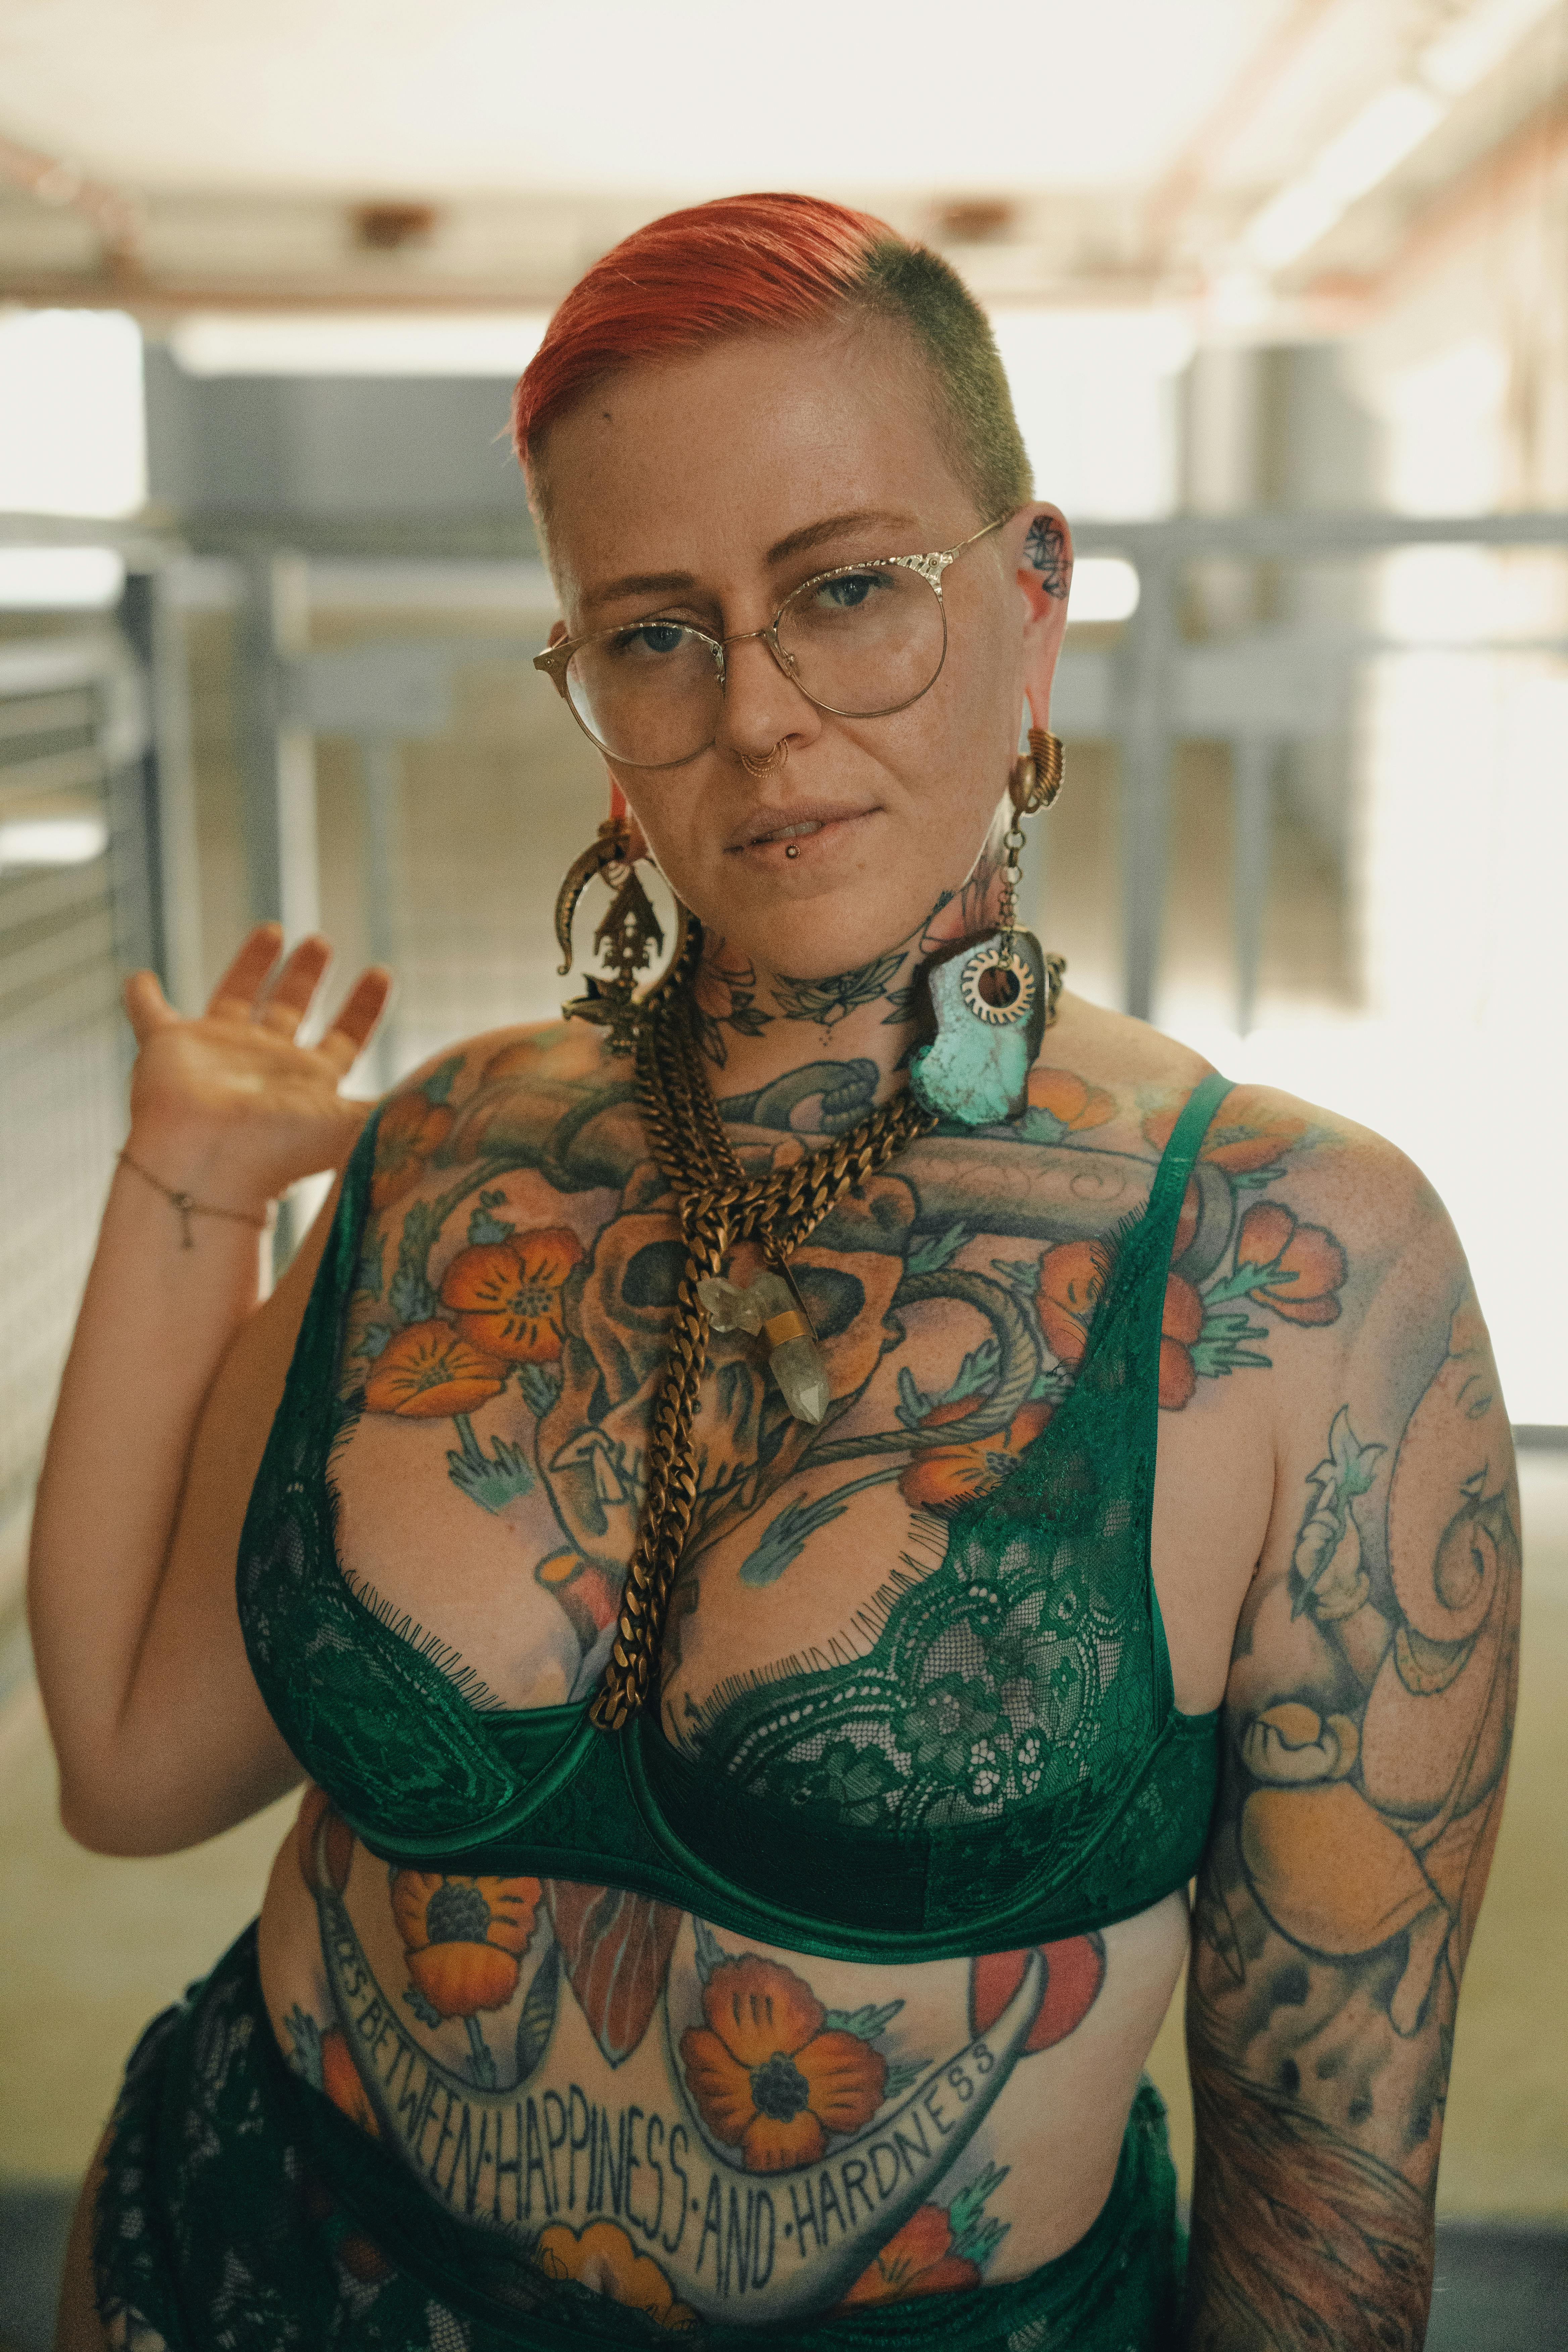 Premium Photo | A woman with tattoos on her body is wearing a tattoo.